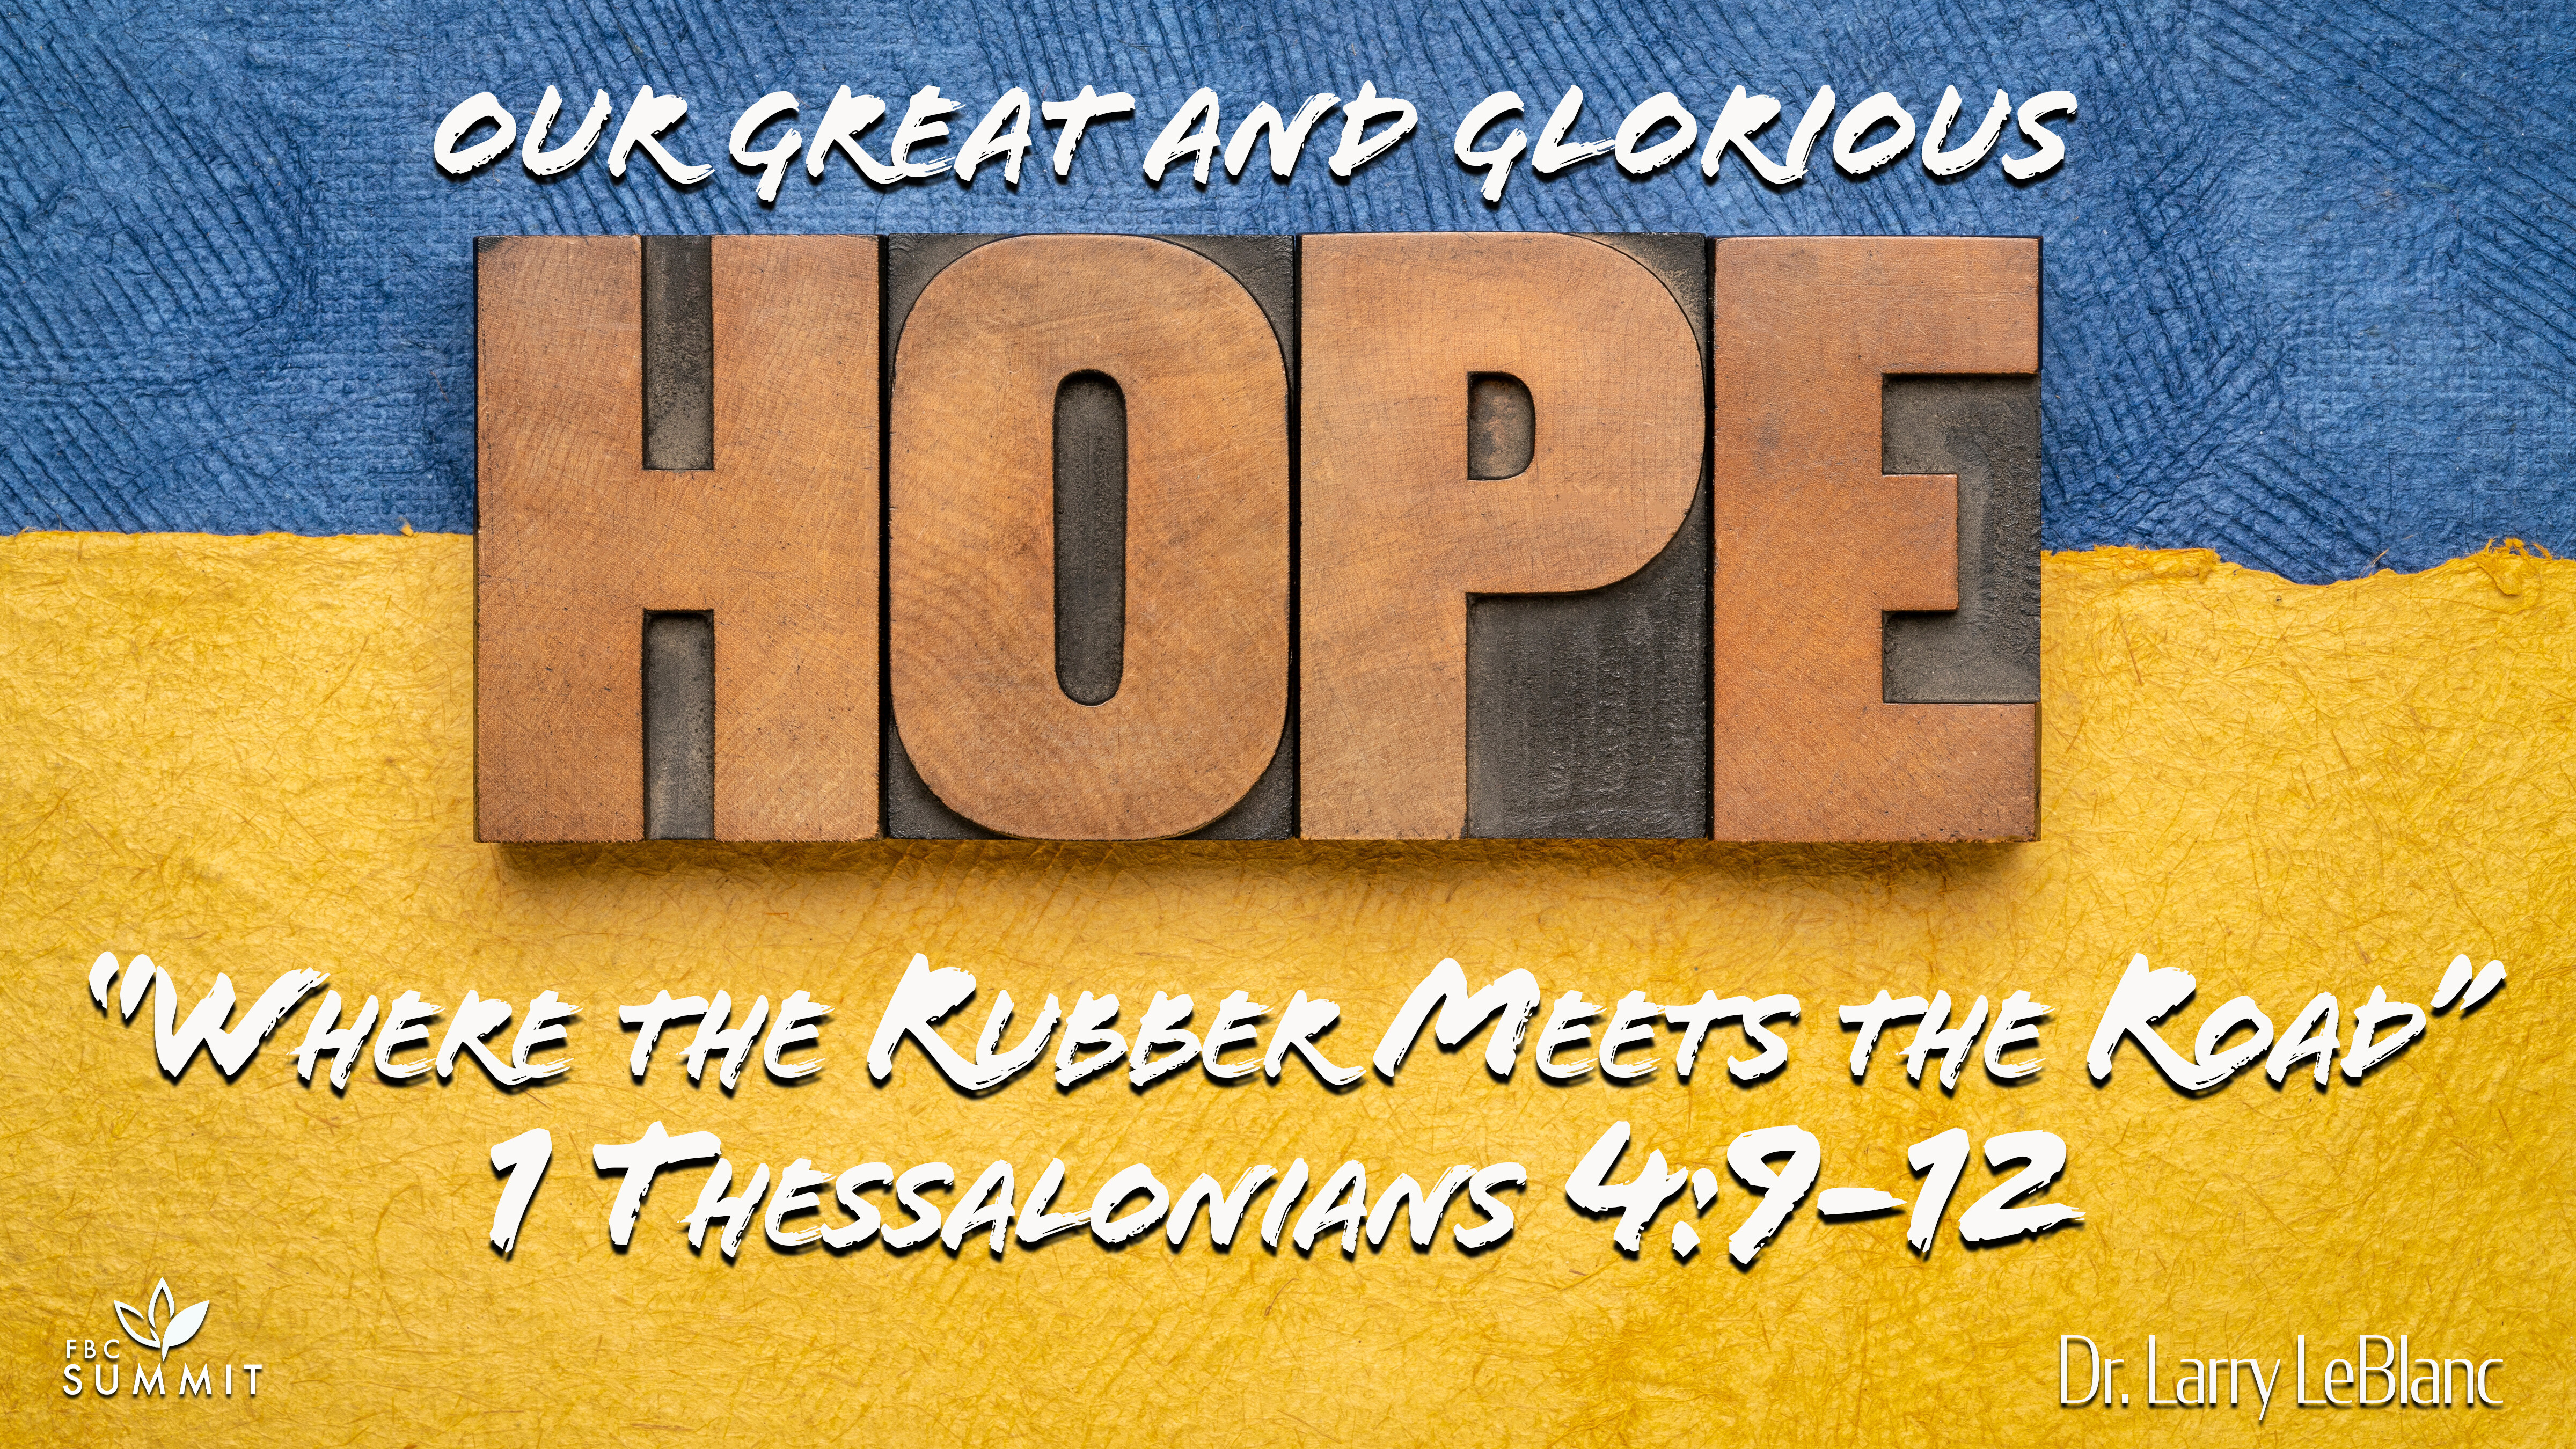 "Where the Rubber Meets the Road" 1 Thessalonians 4:9-12 // Dr. Larry LeBlanc